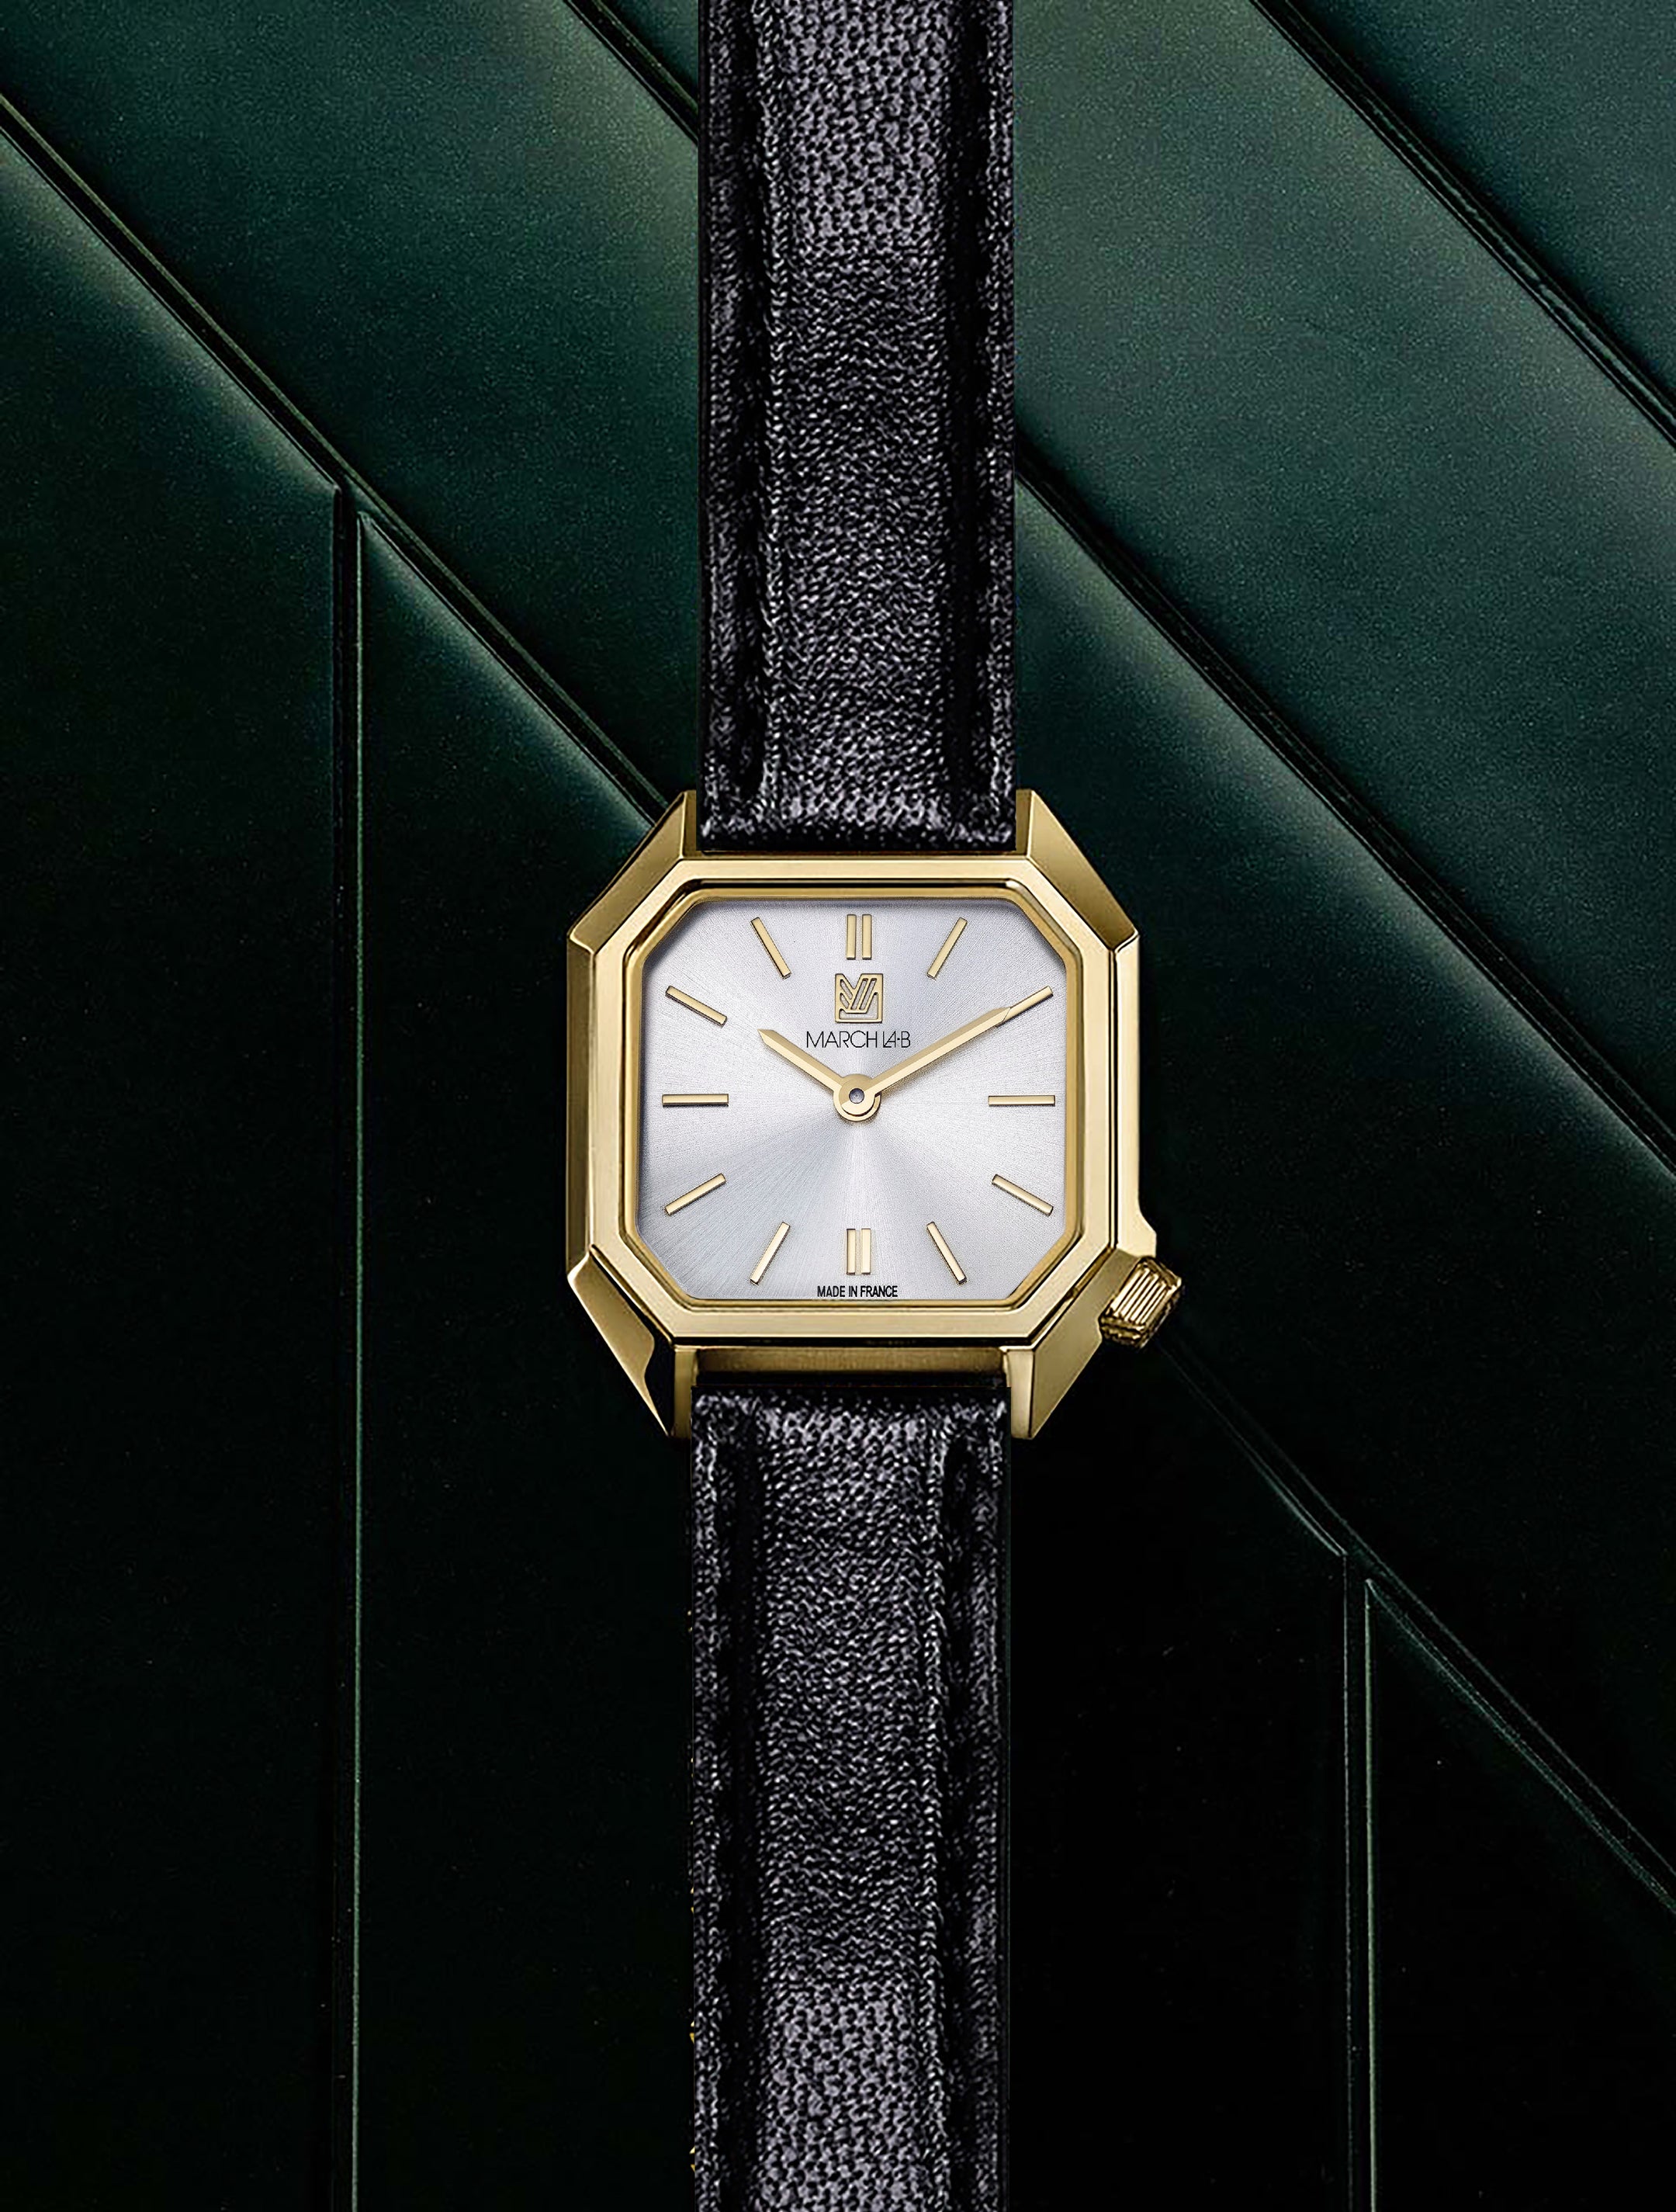 LADY MANSART ELECTRIC CONTINENTAL Watch